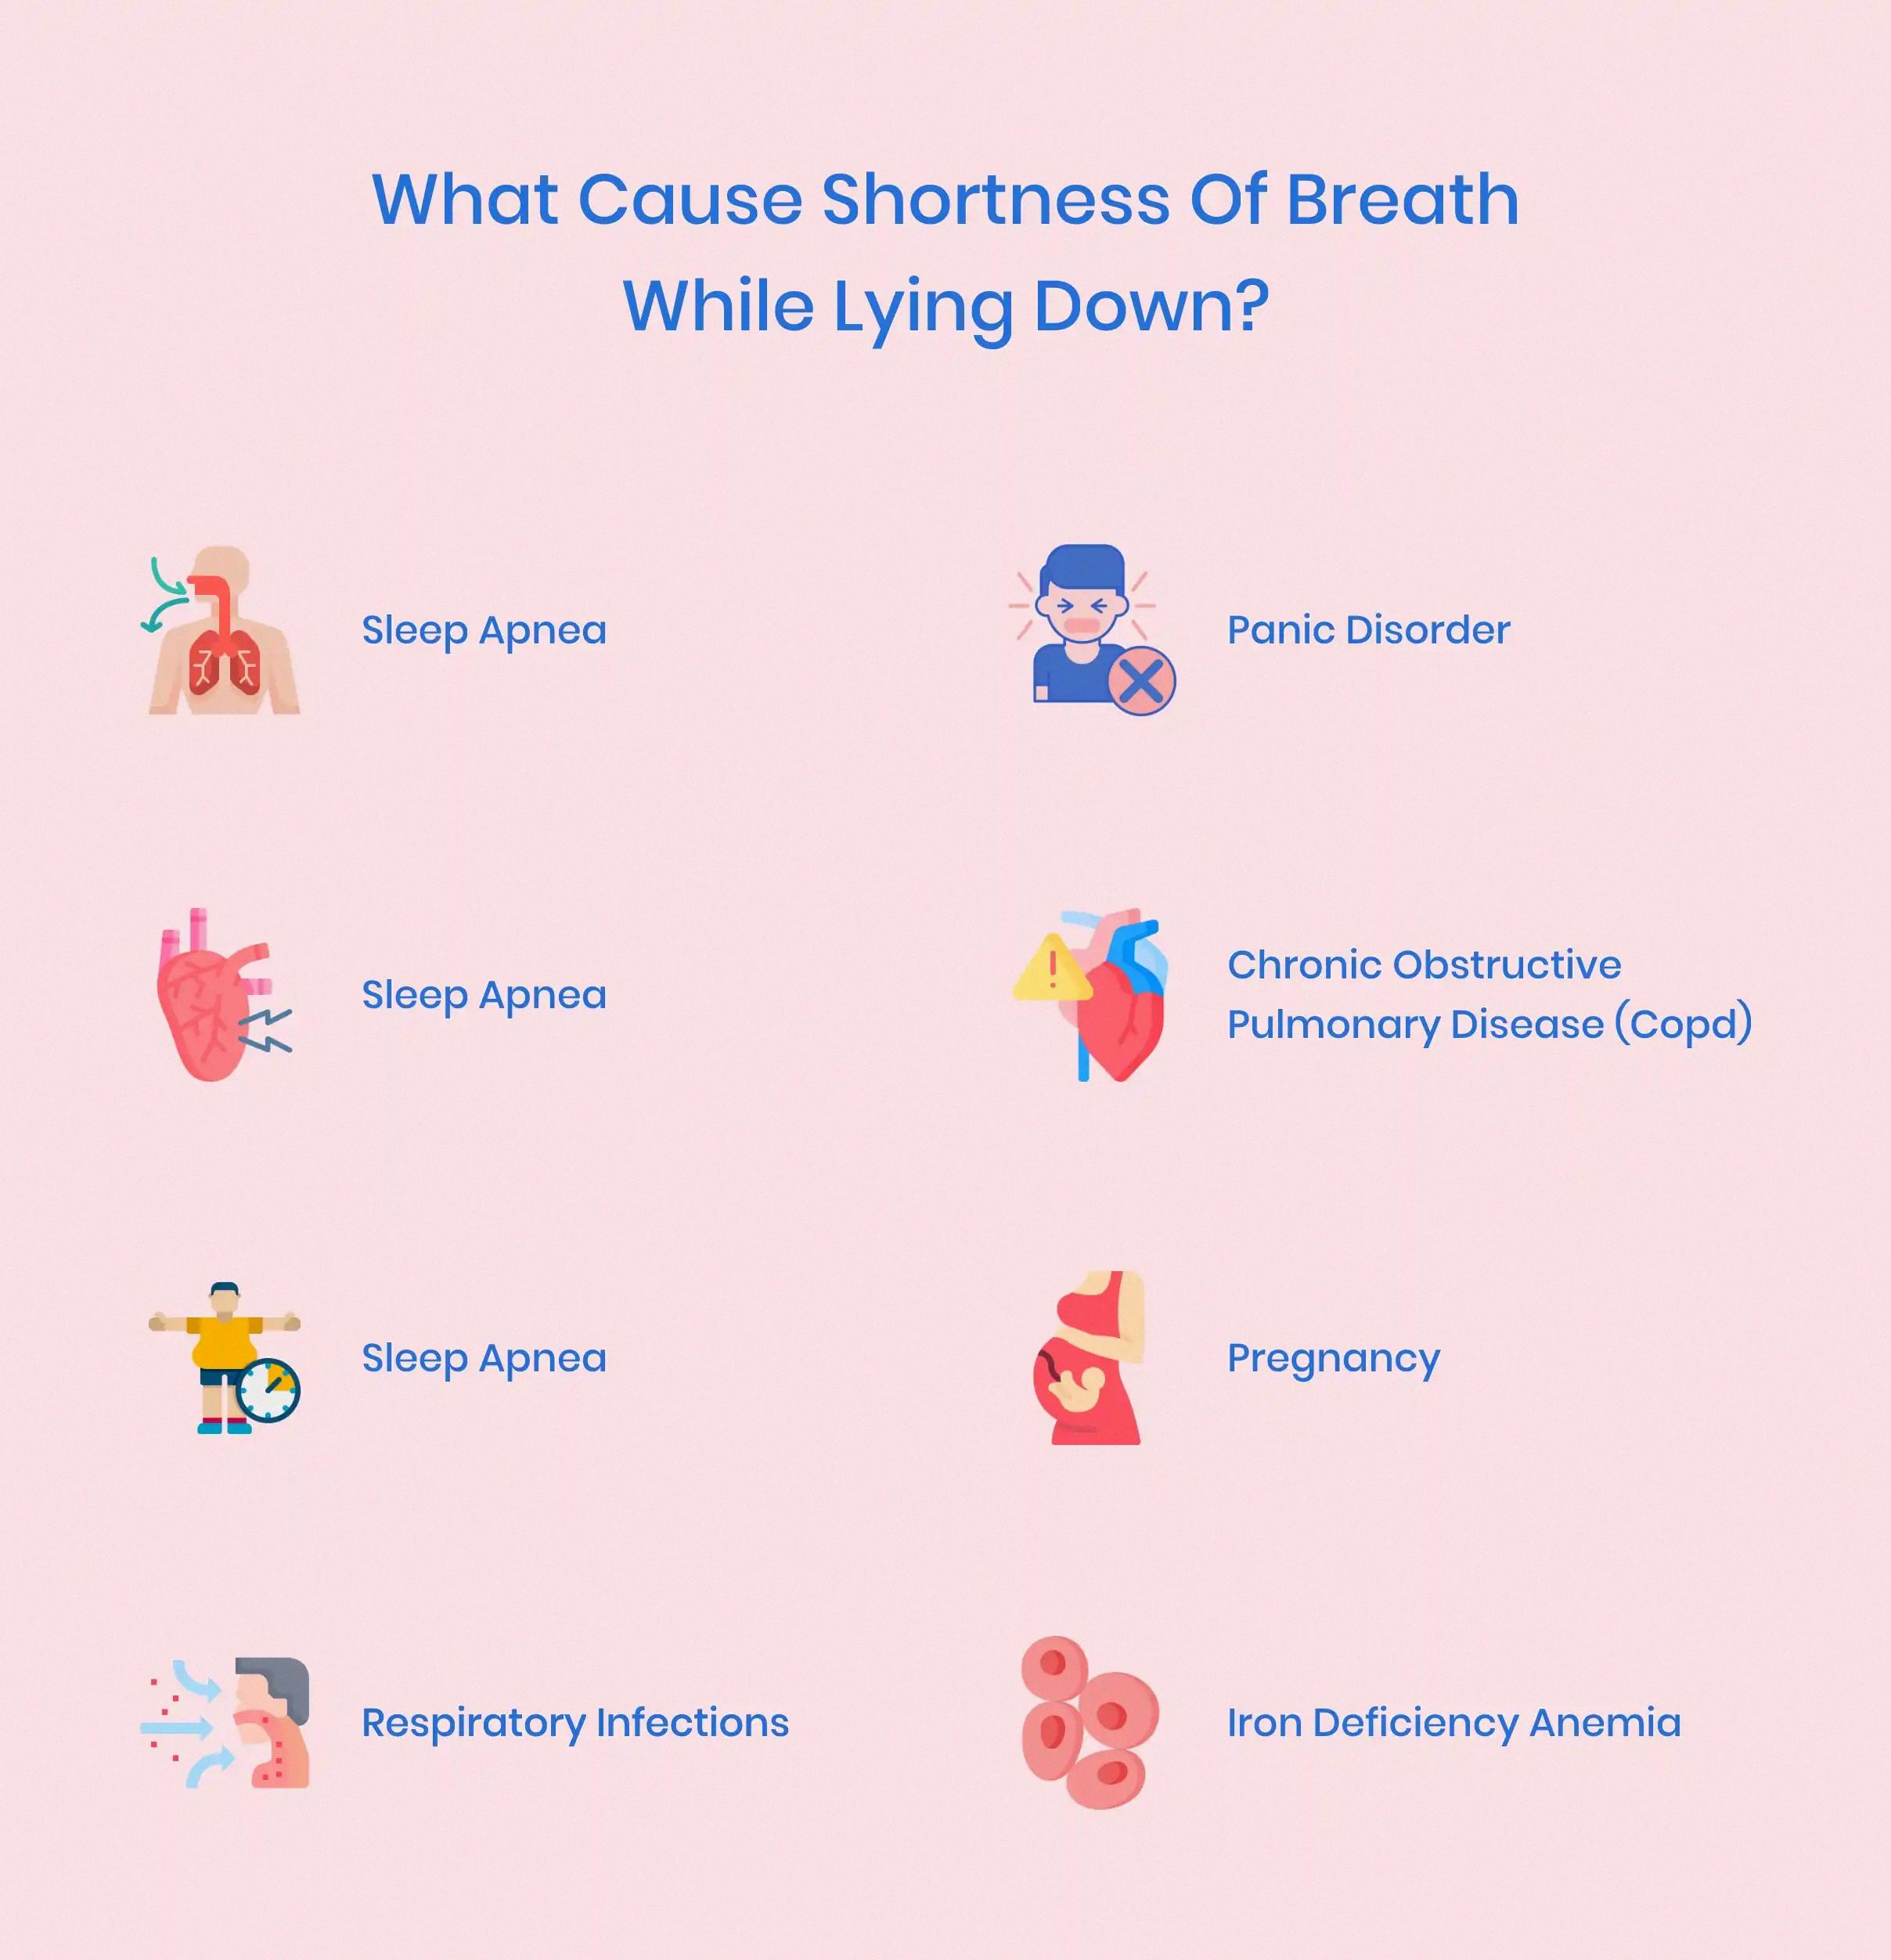 can dehydration cause shortness of breath